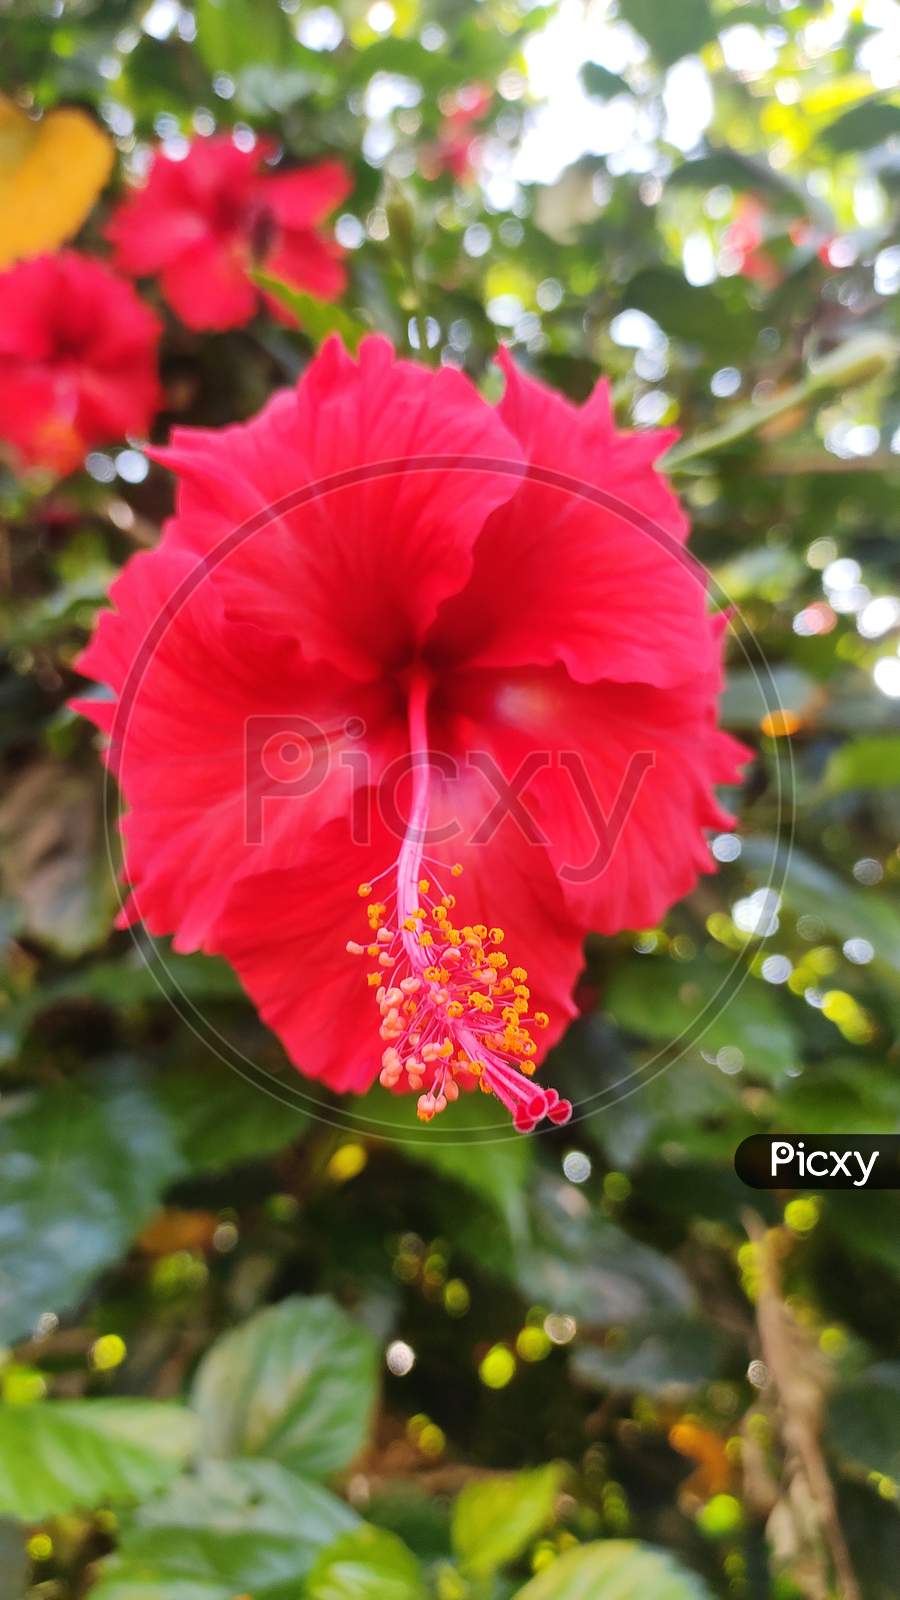 Red Hibiscus flower with pollen grains